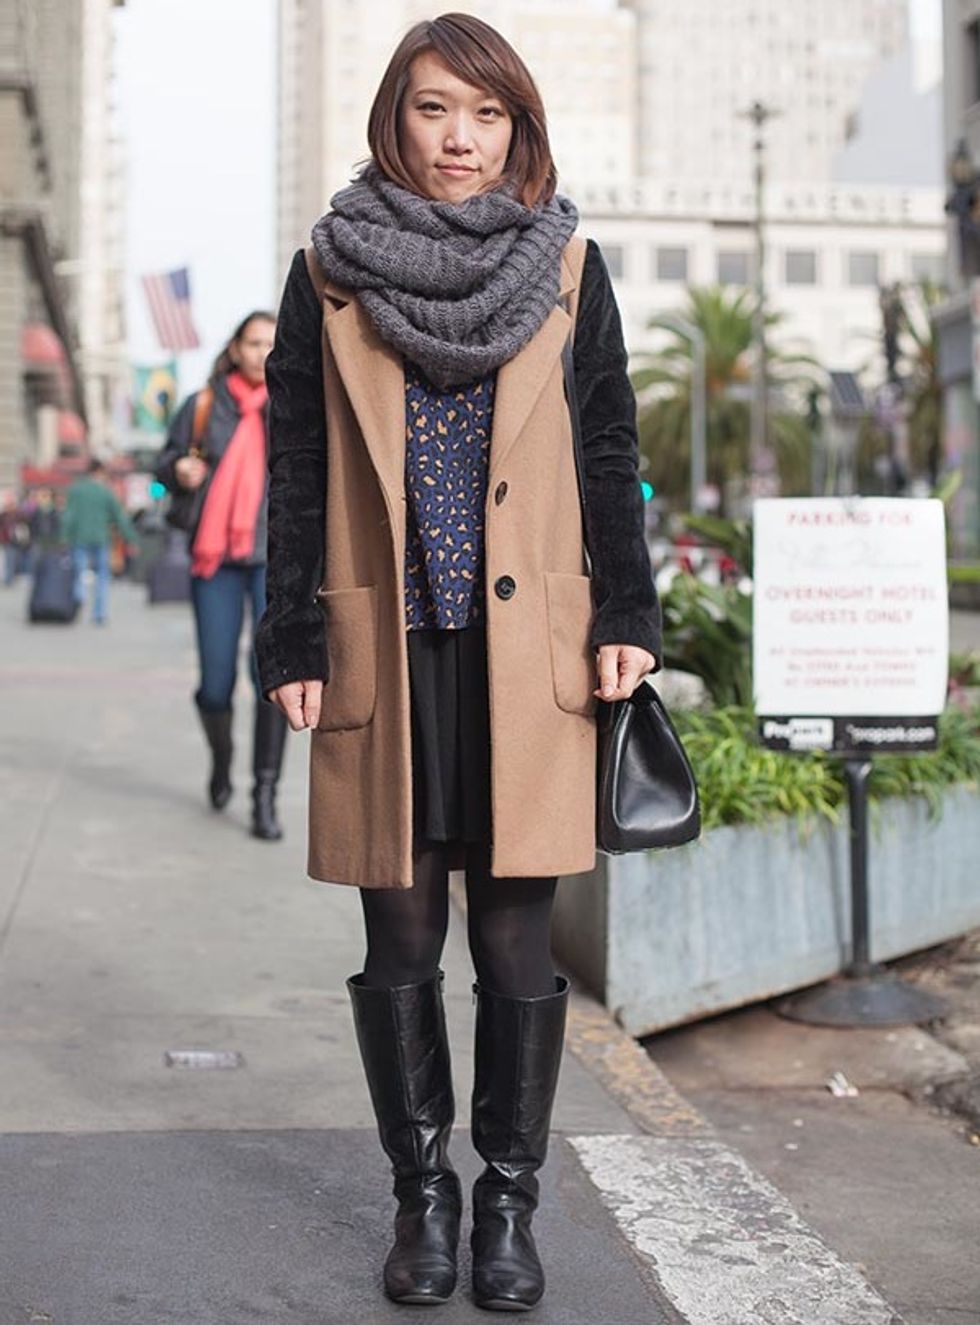 Street Style Report: A Style-Savvy Accountant in Union Square